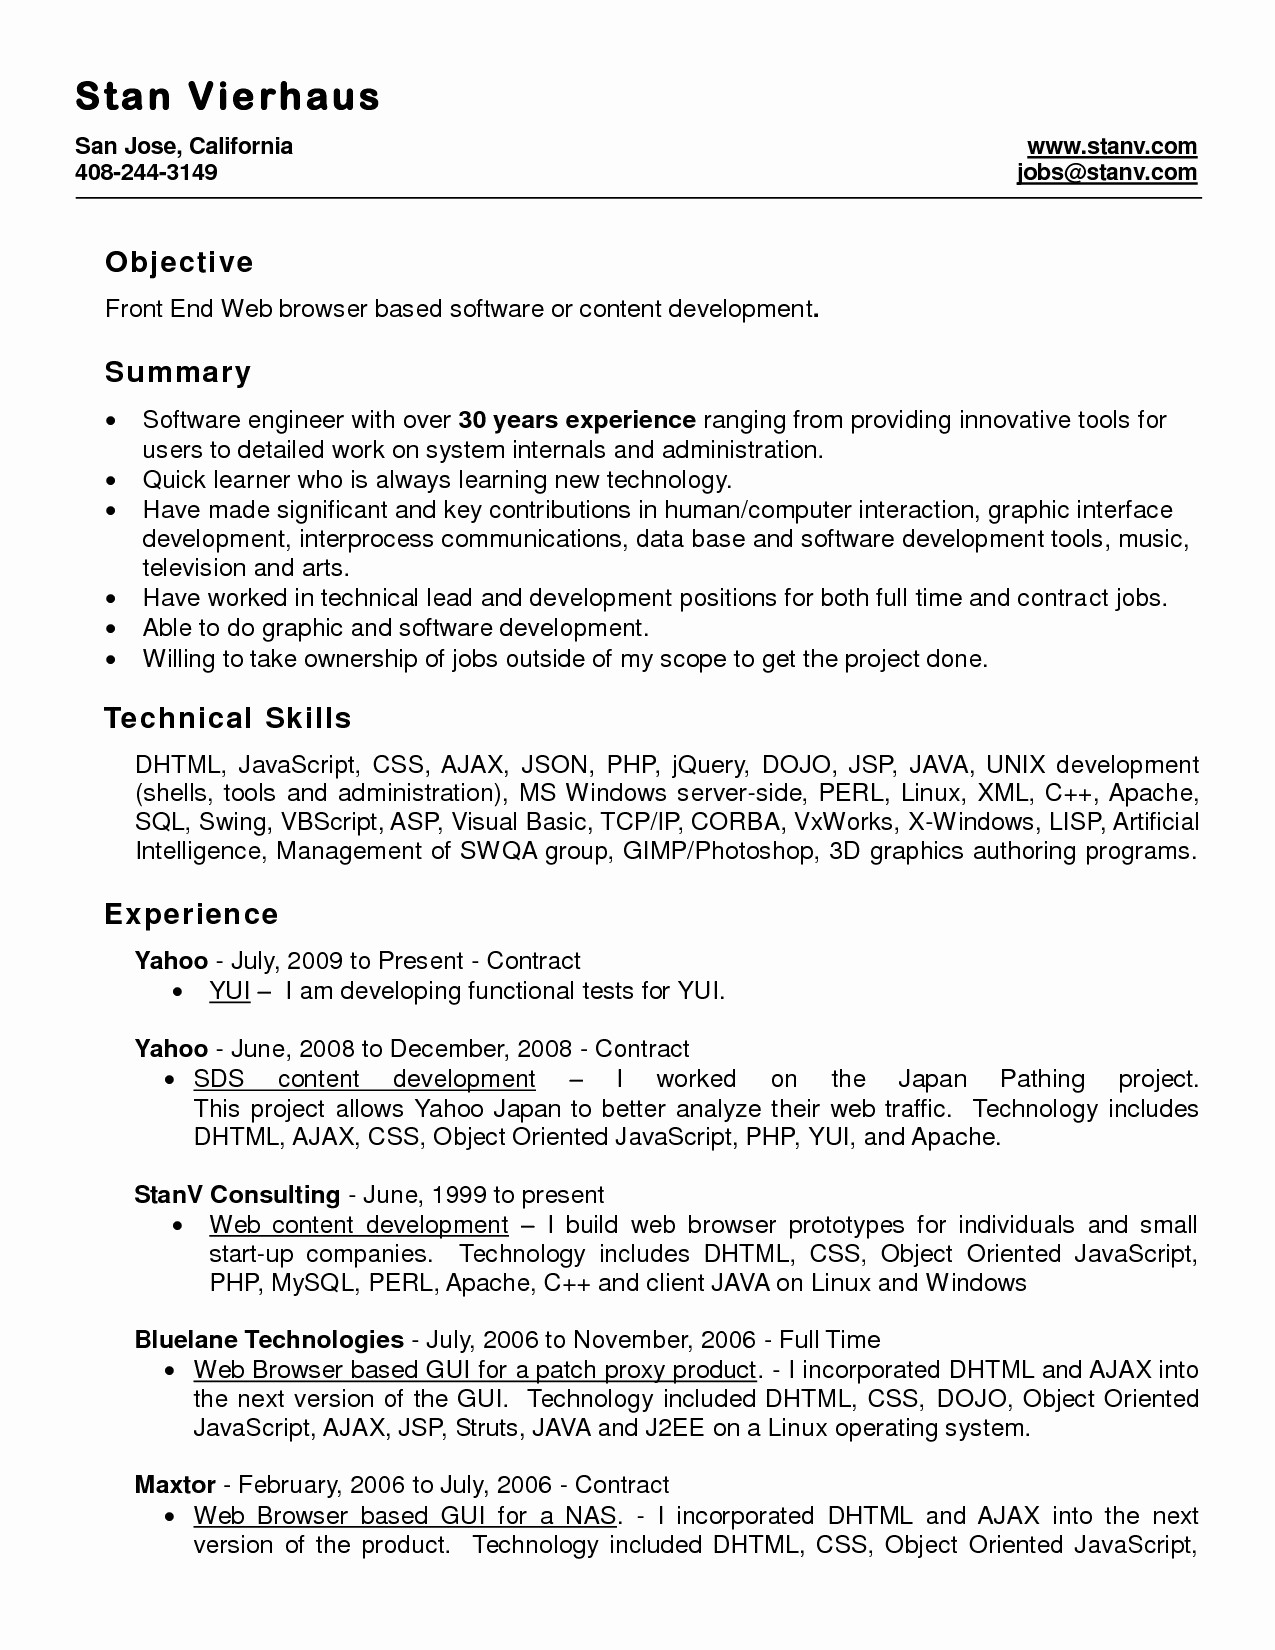 Microsoft Office Word Resume Template Unique Resume Template Microsoft Word 2017